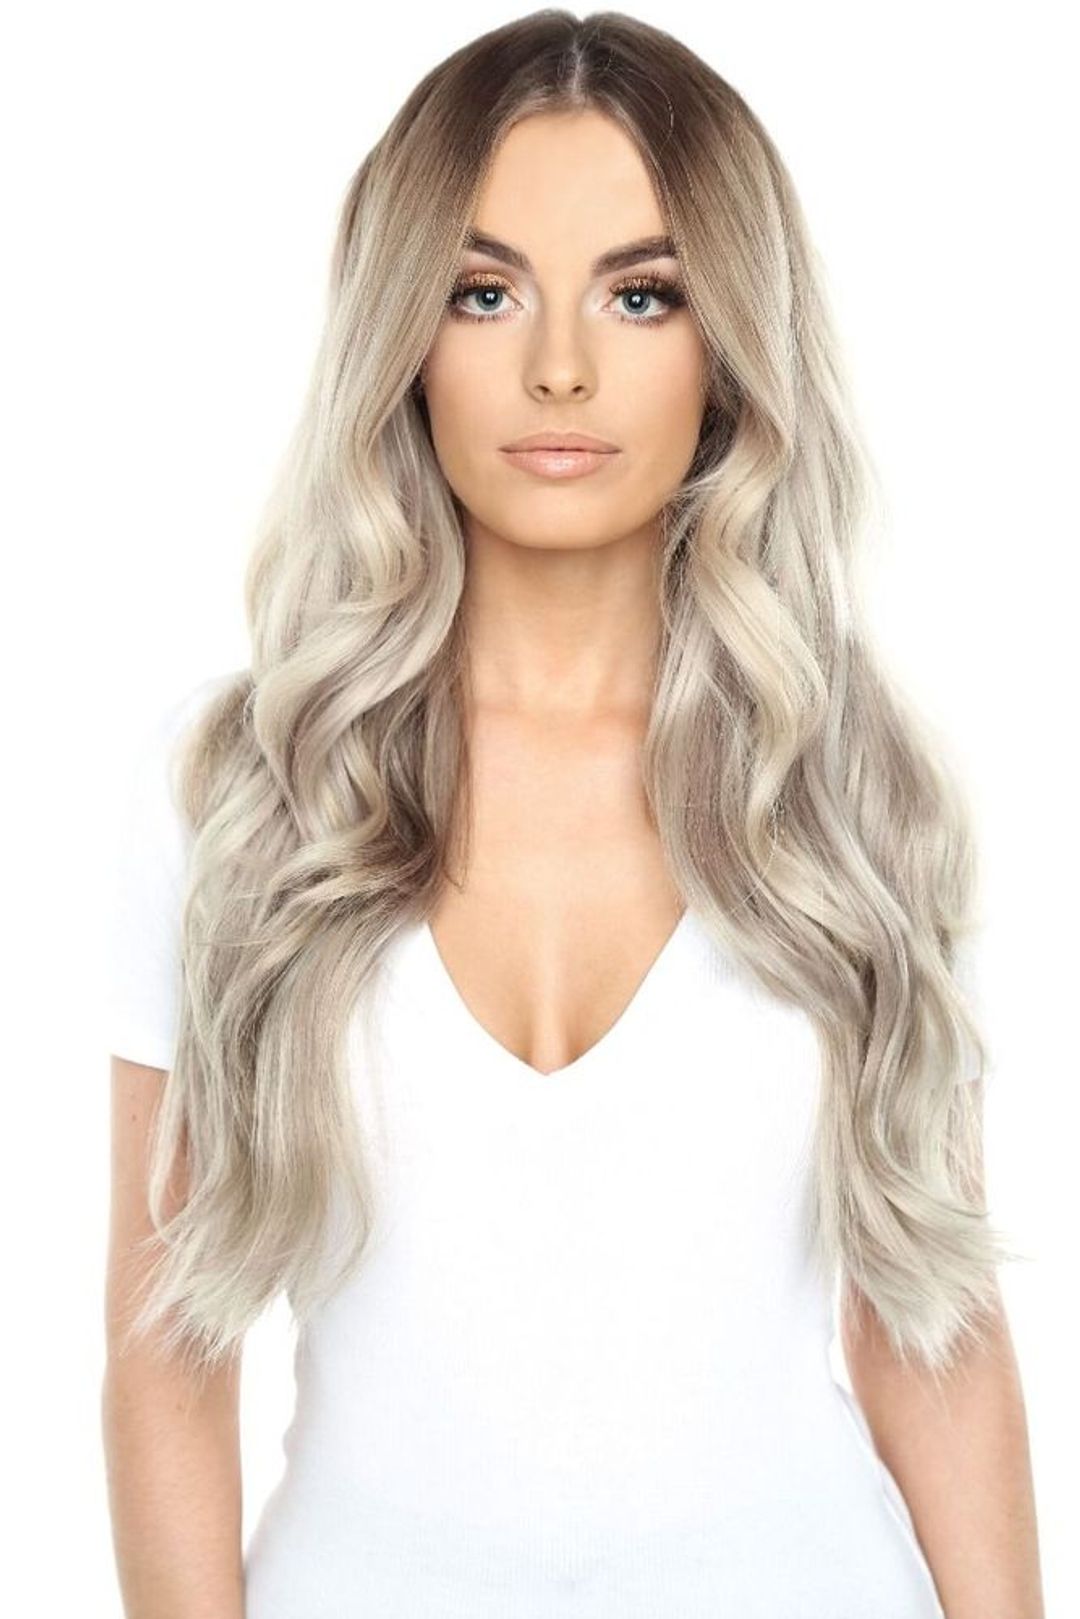 Beauty Works Double Hair Set Clip-In Extensions - Champagne Blonde,20"